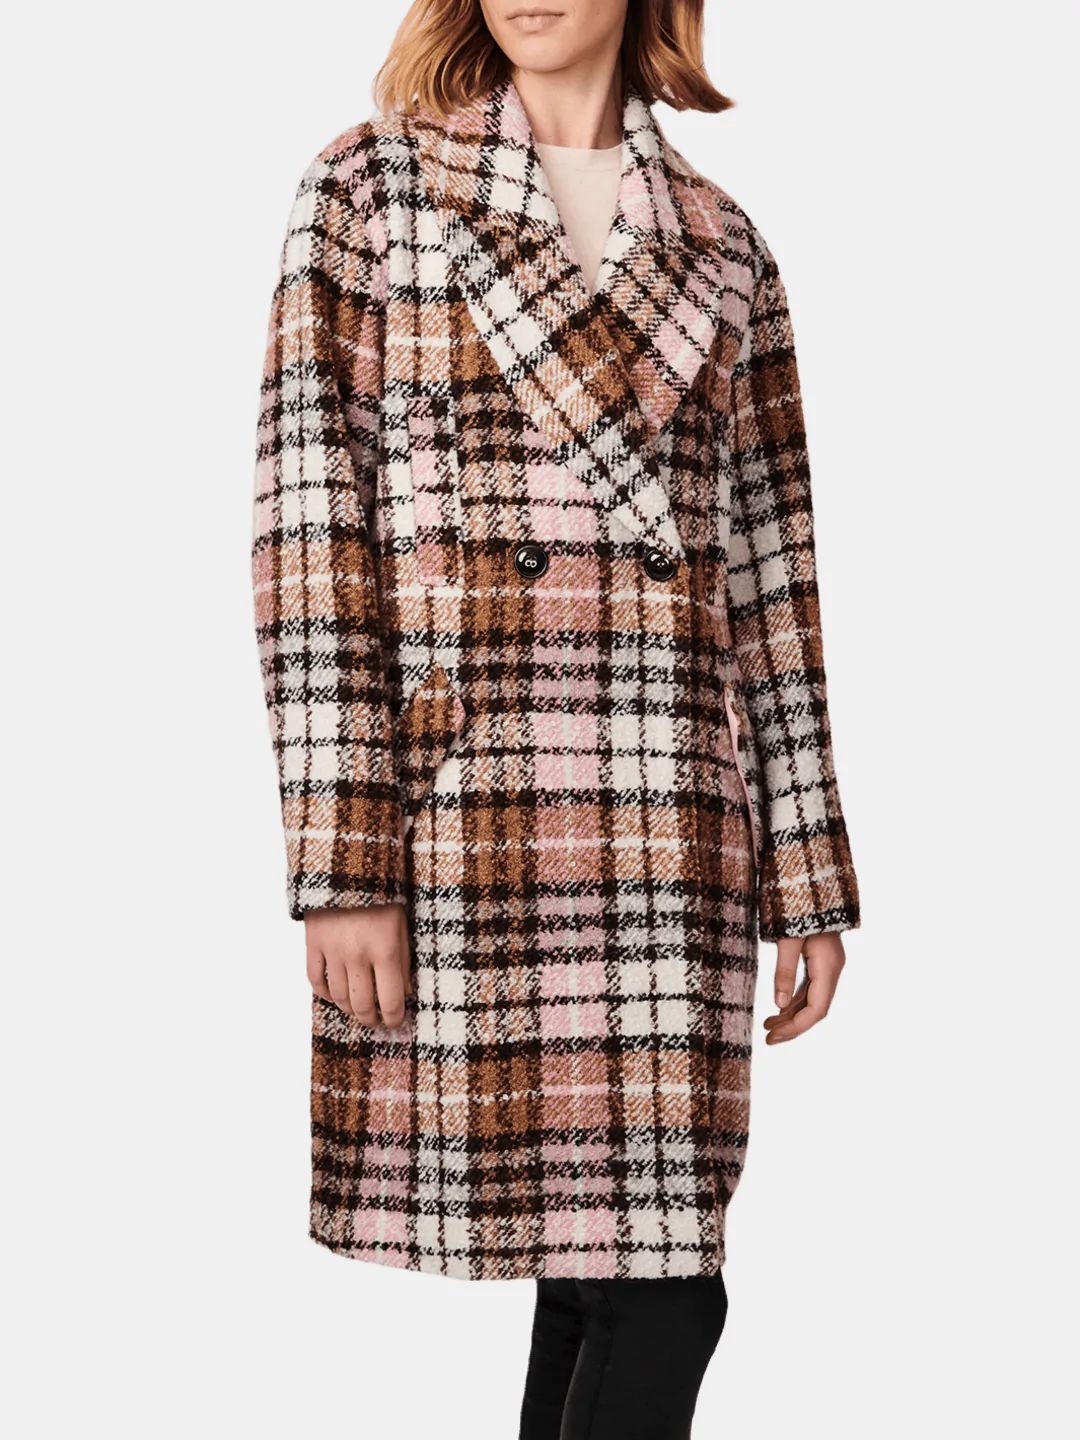 Bernardo Women's Plaid Wool Double Breasted Coat in Pink. brown Plaid XS Lord & Taylor | Lord & Taylor